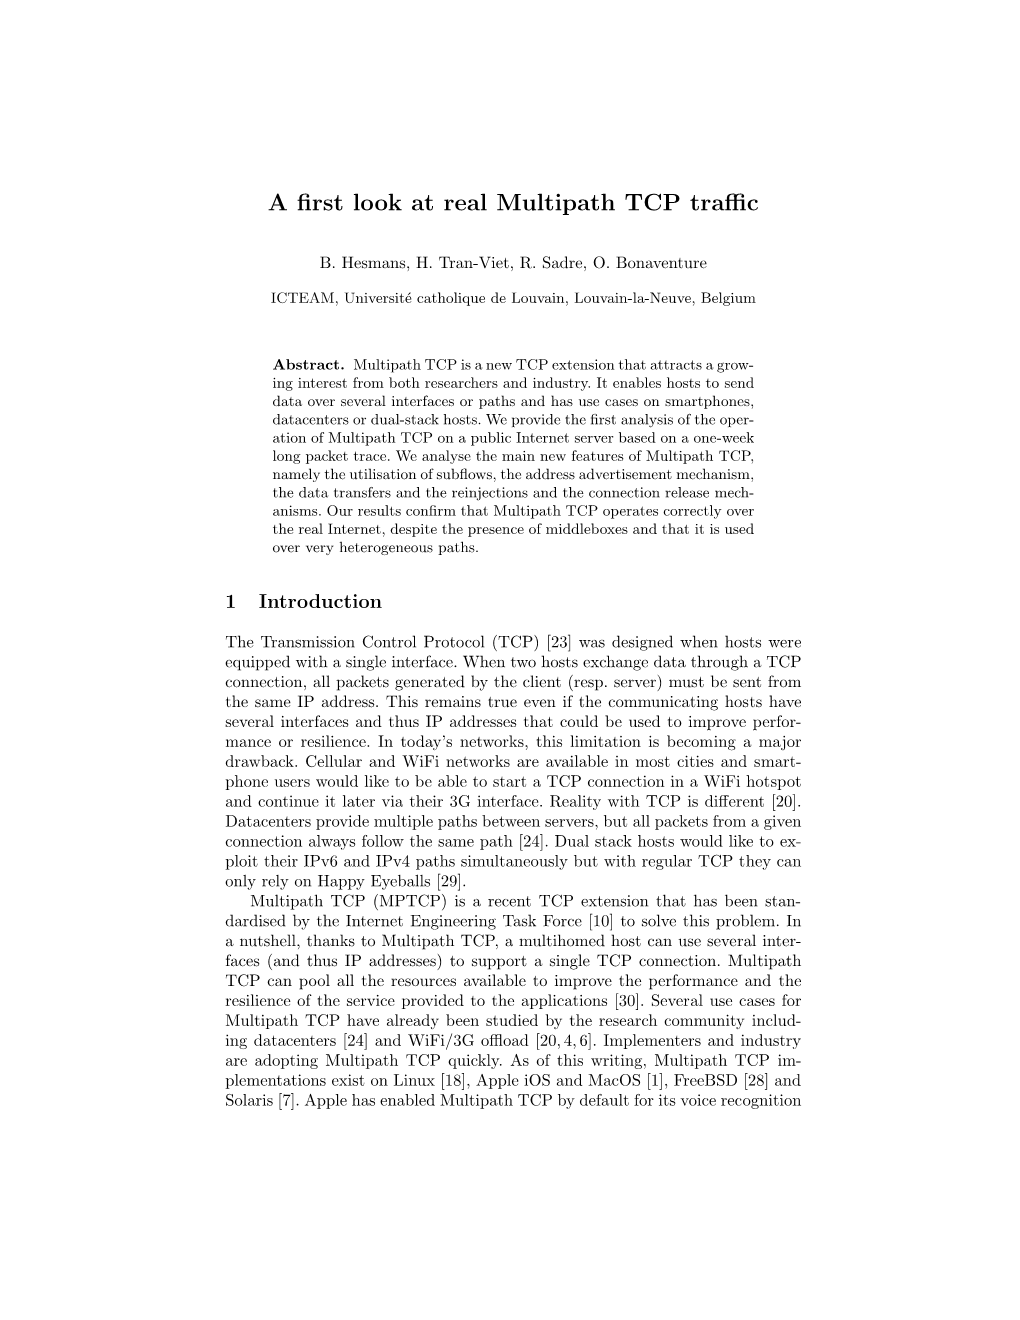 A First Look at Real Multipath TCP Traffic